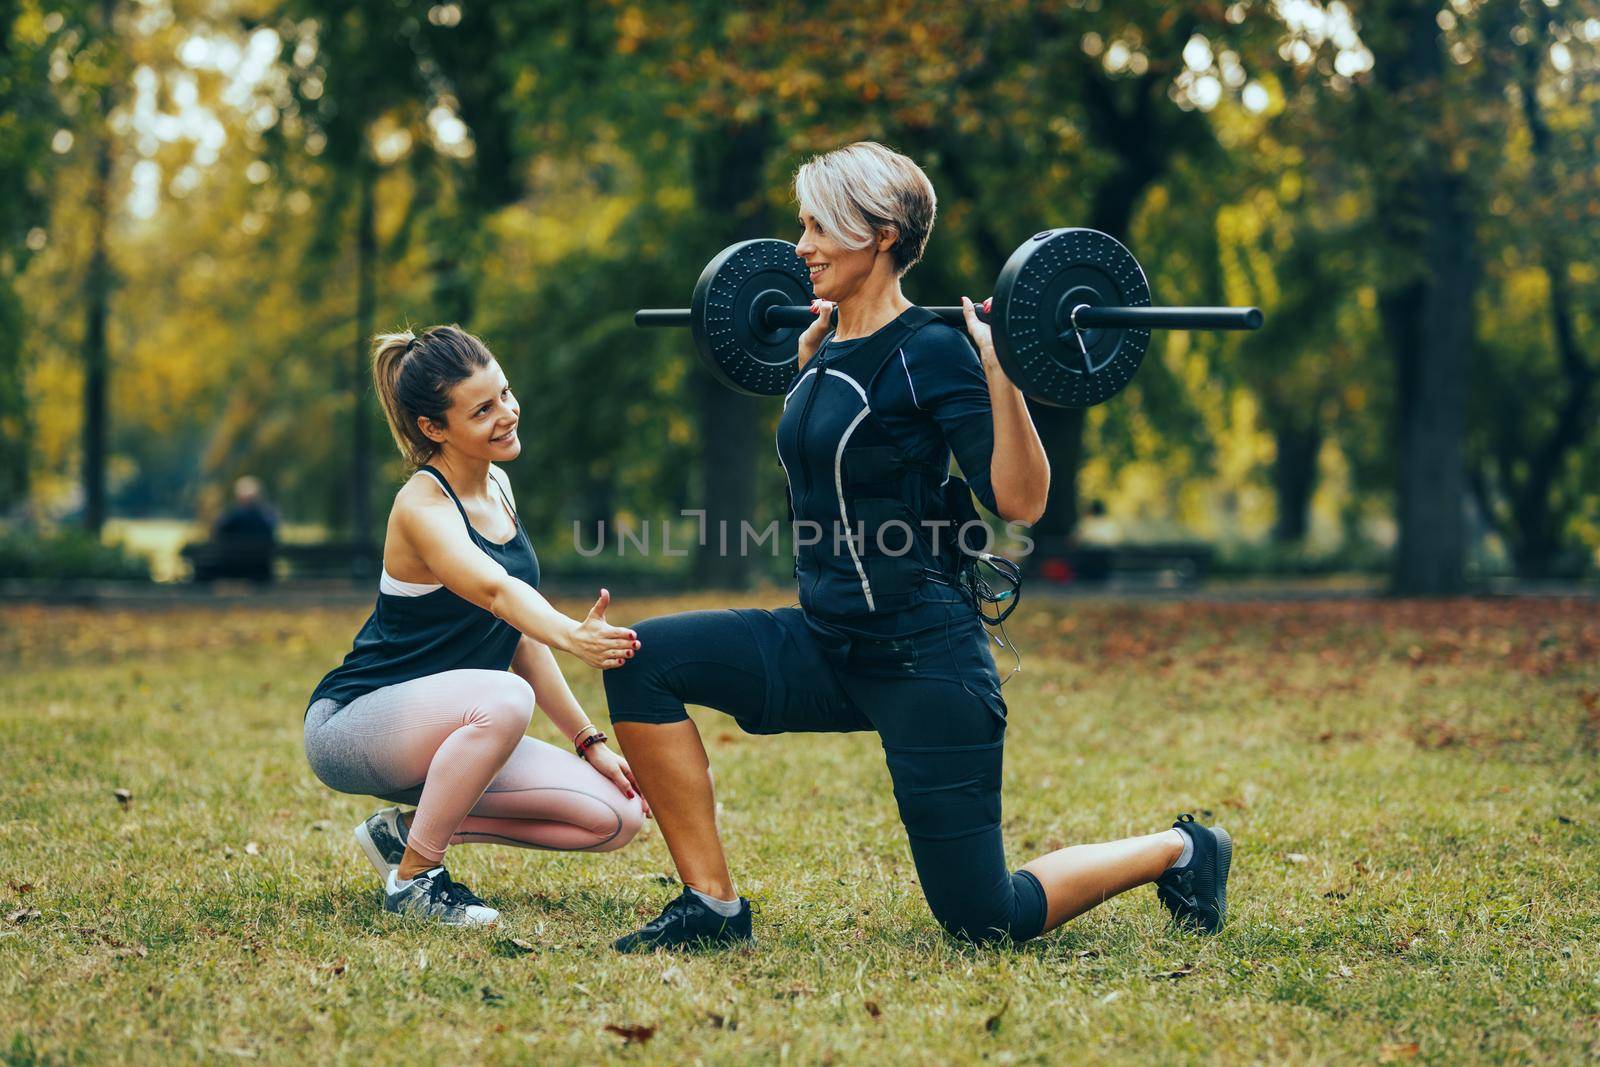 A fit mature woman is doing lunges exercises with personal trainer in the park, dressed in a black suit with an EMS electronic simulator to stimulate her muscles.